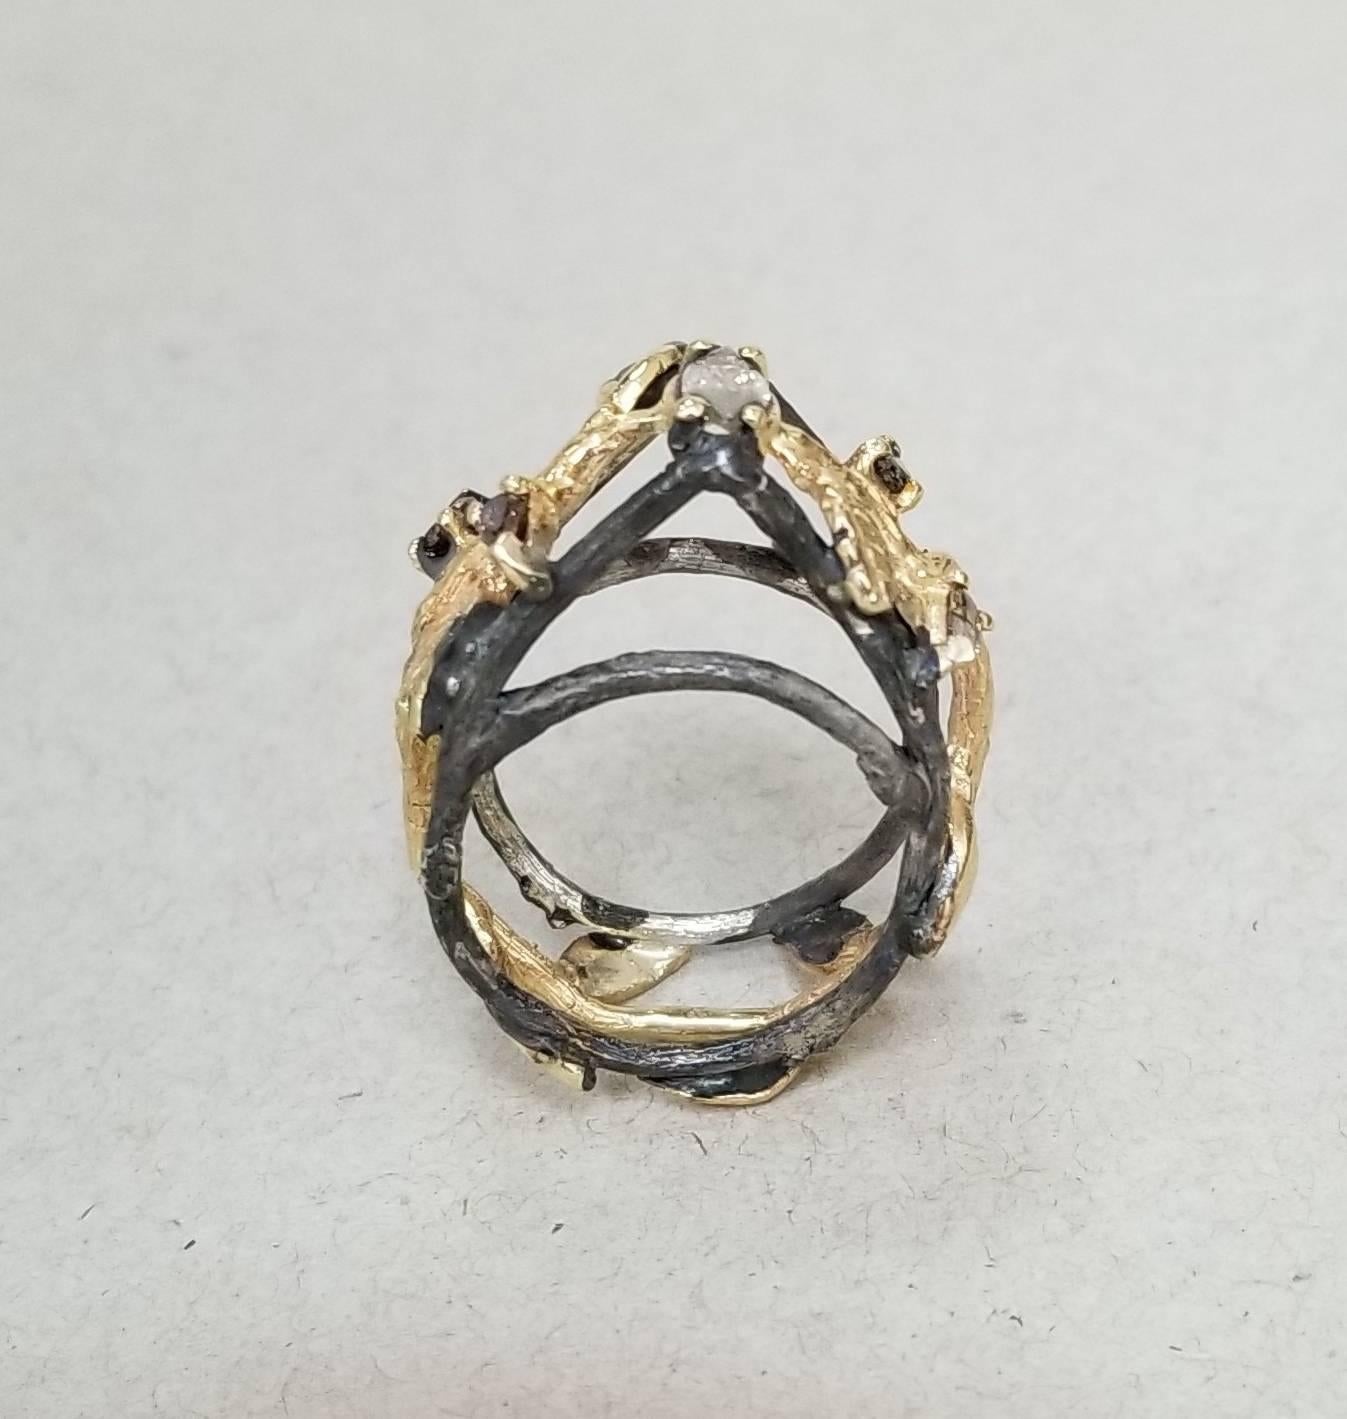 14k yellow gold and silver Gresha signature bark and leaf ring with 1 natural brown marquise cut diamond weighing .32 and 4 natural brown pea rshape cut diamonds weighing .49pts. set in a 14k yellow gold bark and leaf inlaid in silver that has been